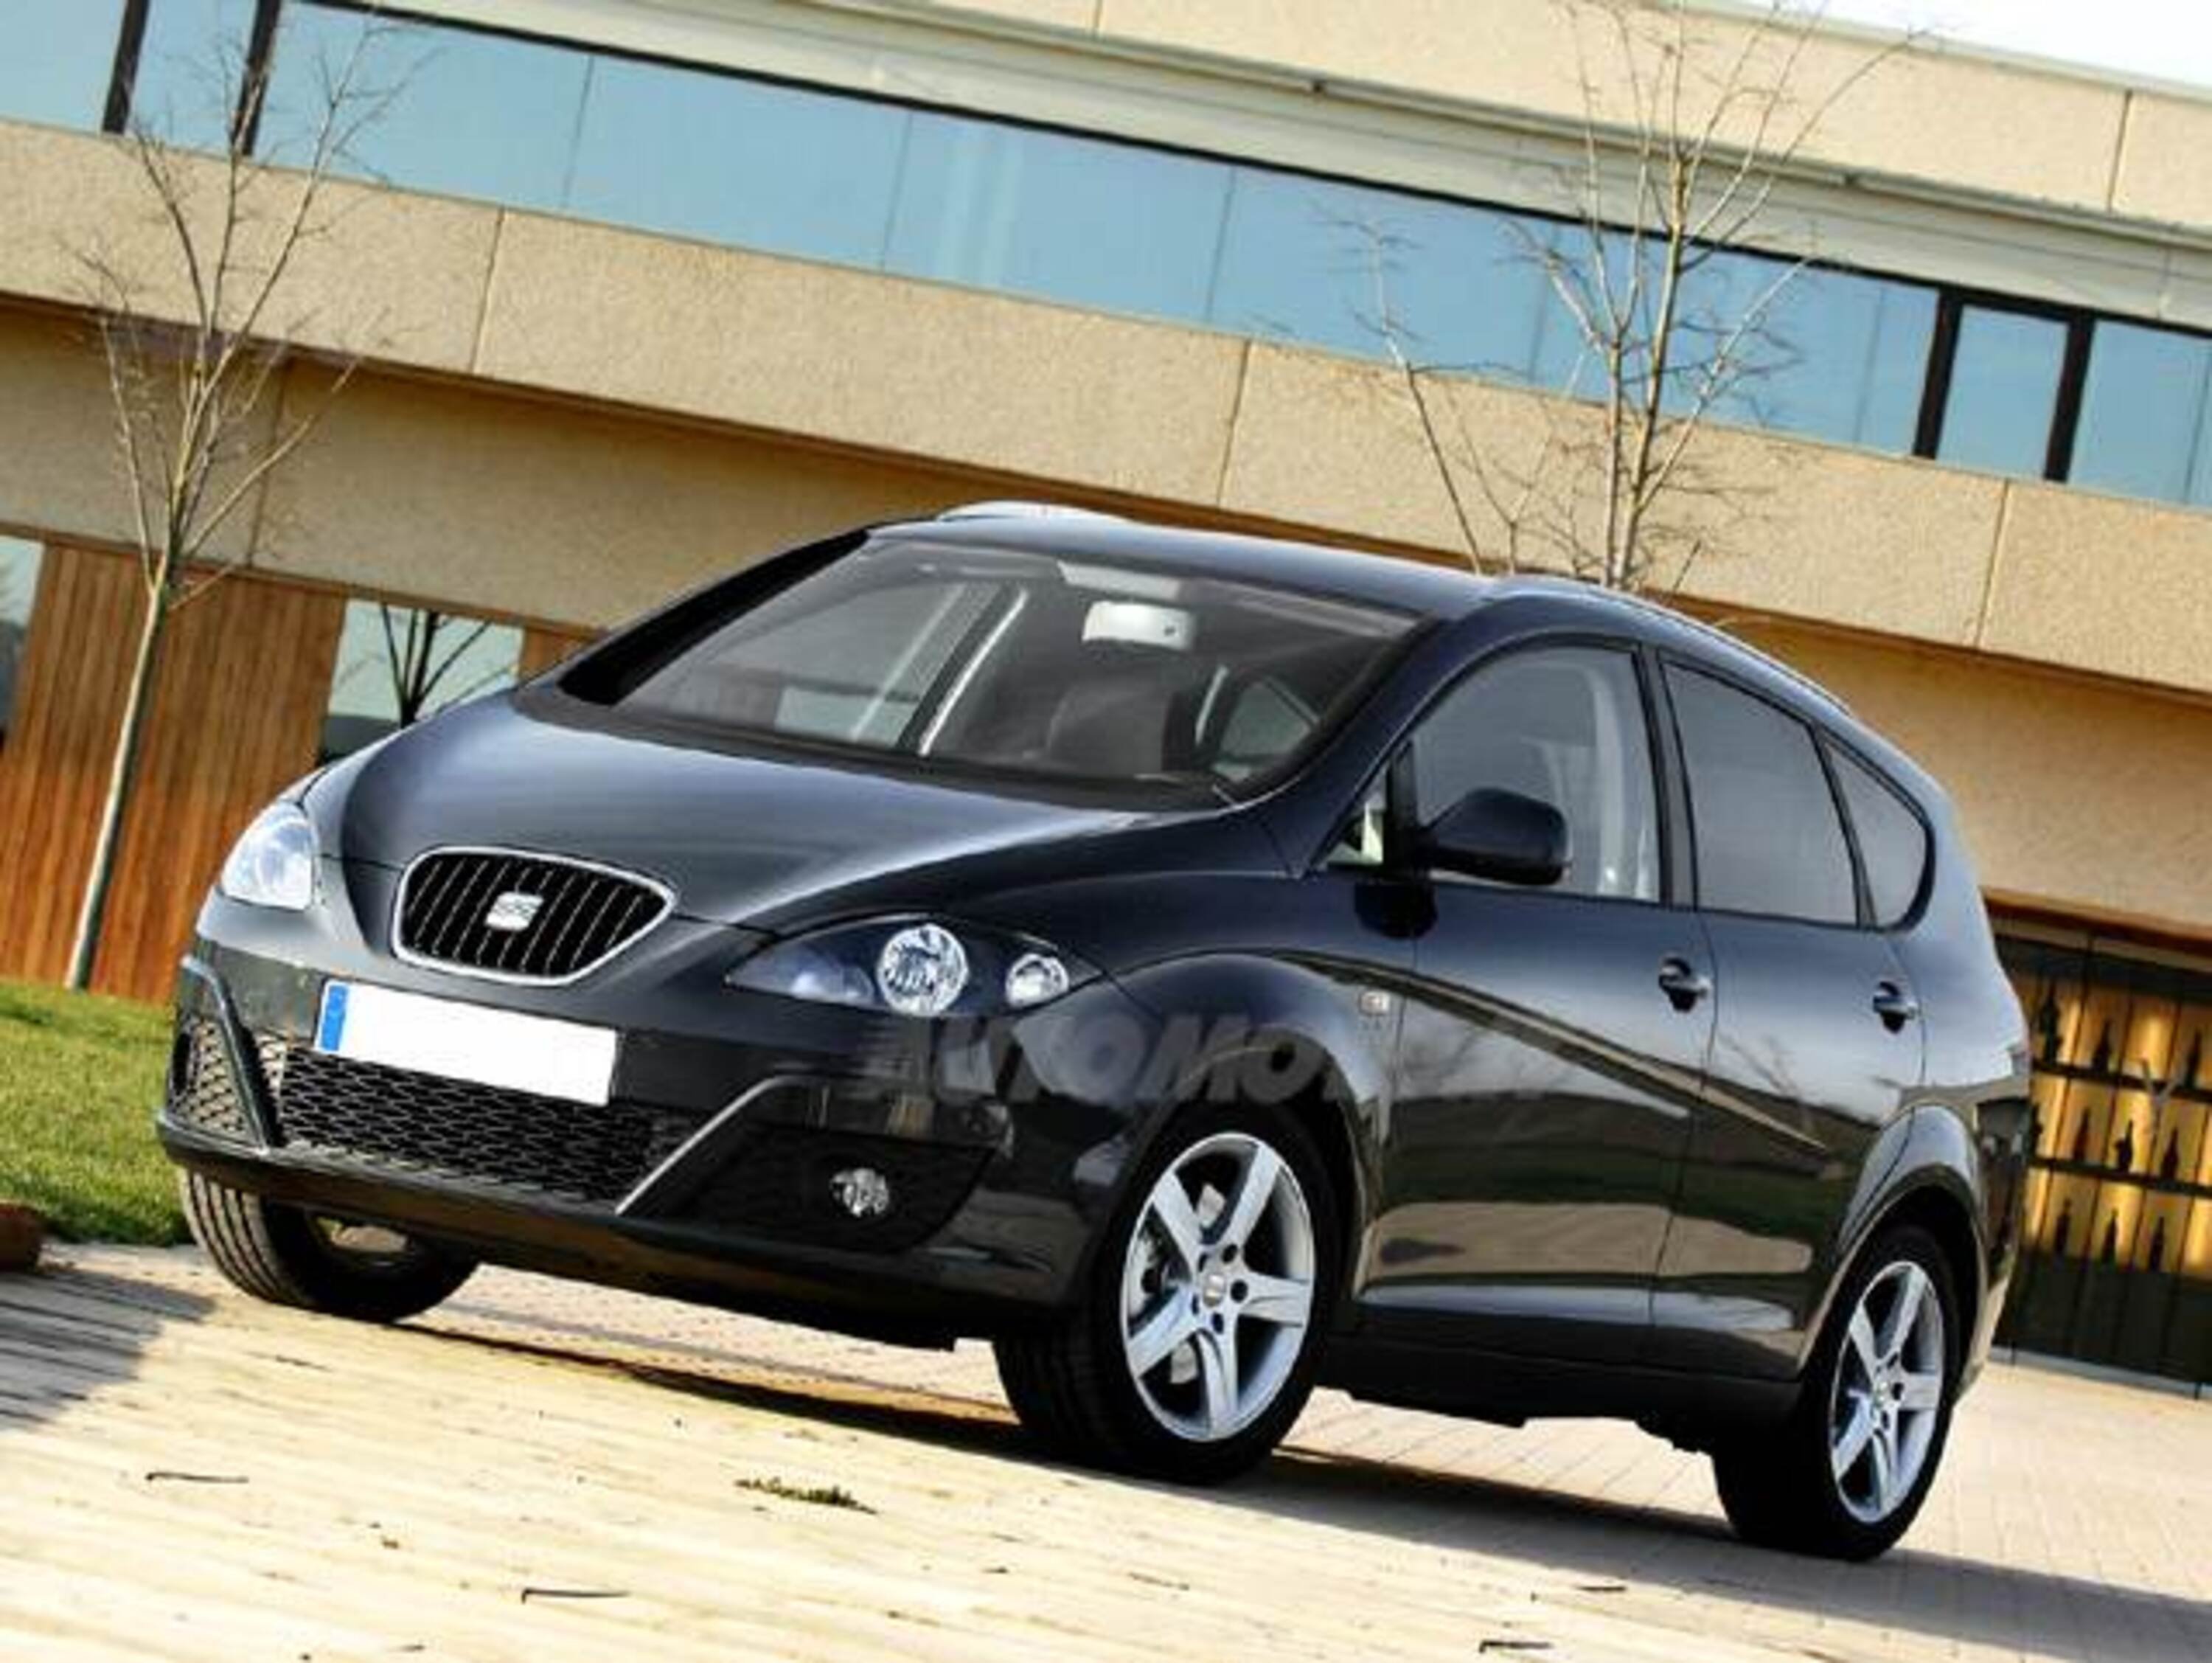 SEAT Altea XL 1.4 Reference 